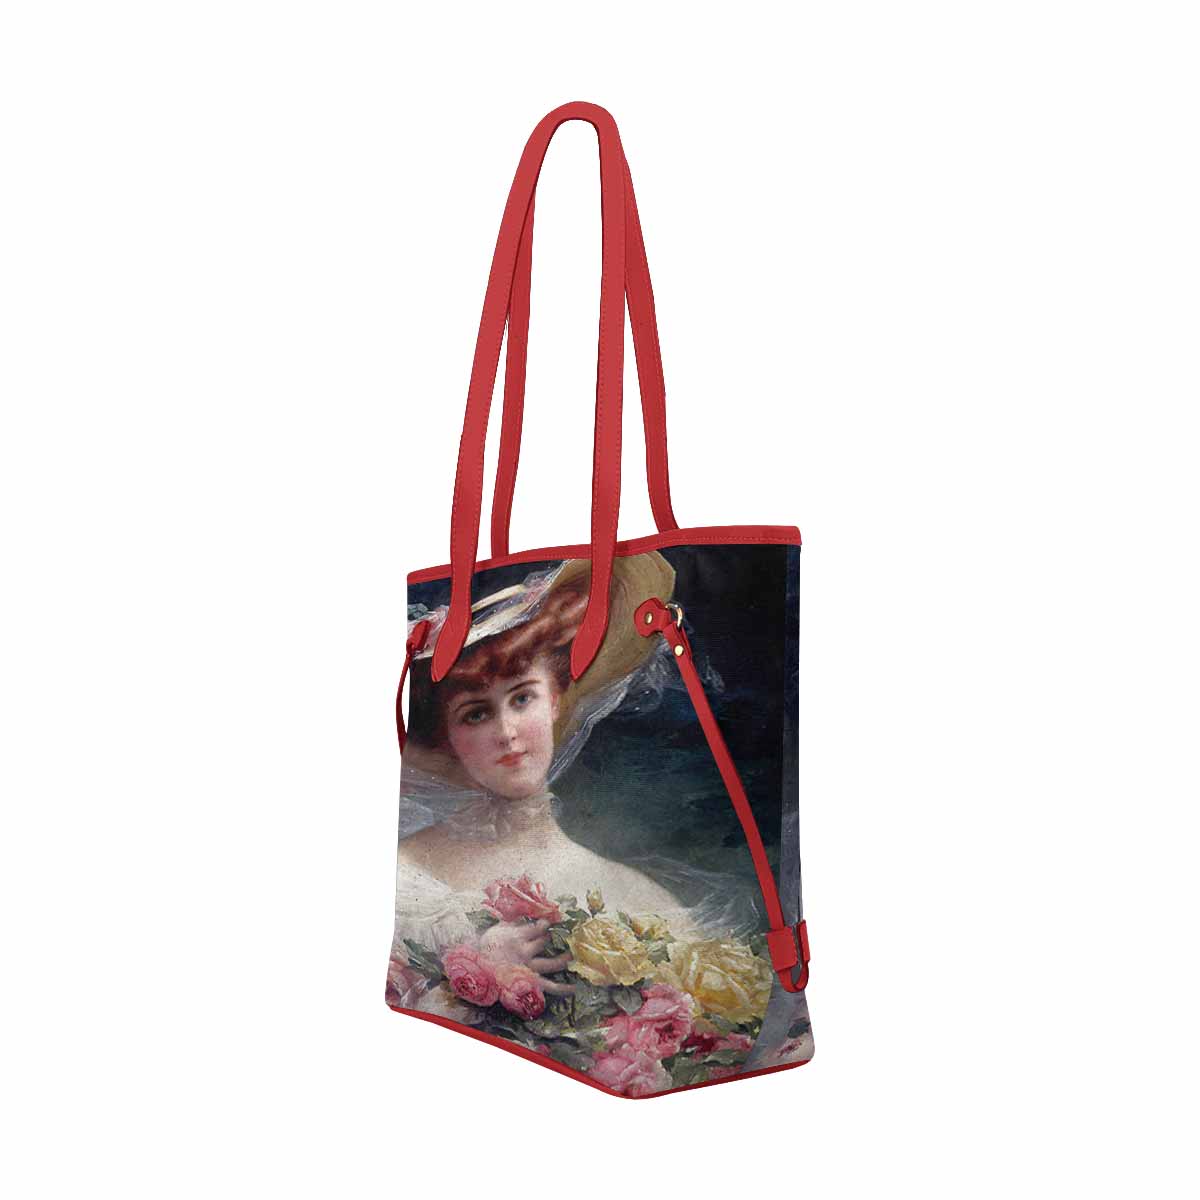 Victorian Lady Design Handbag, Model 1695361, Beauty With Flowers, RED TRIM